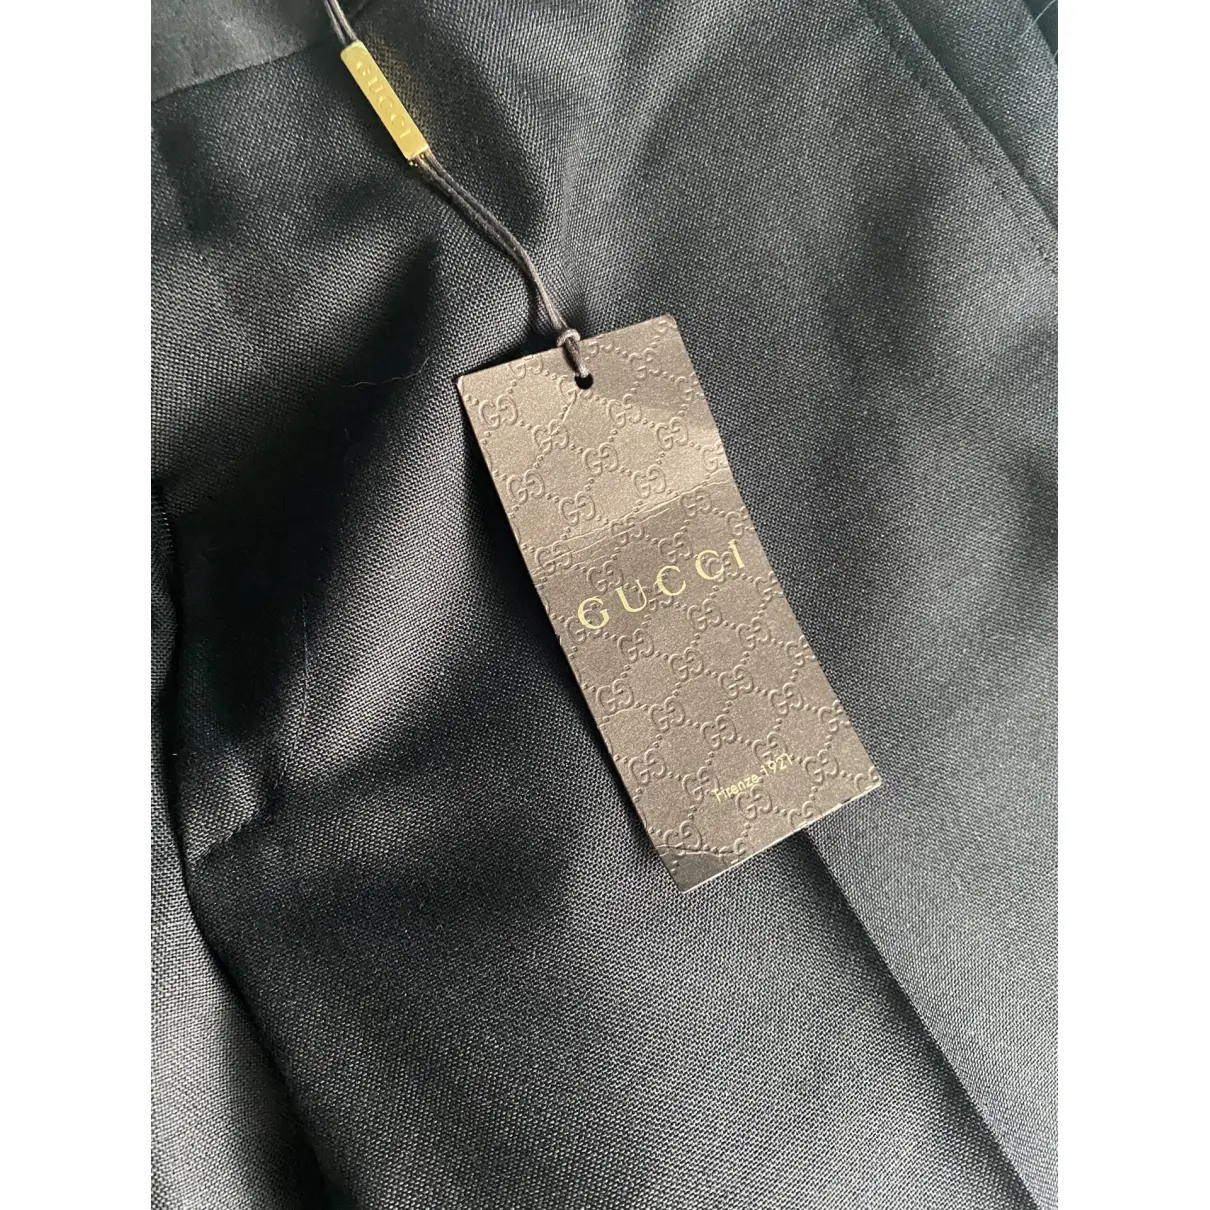 Buy Gucci Wool trousers online